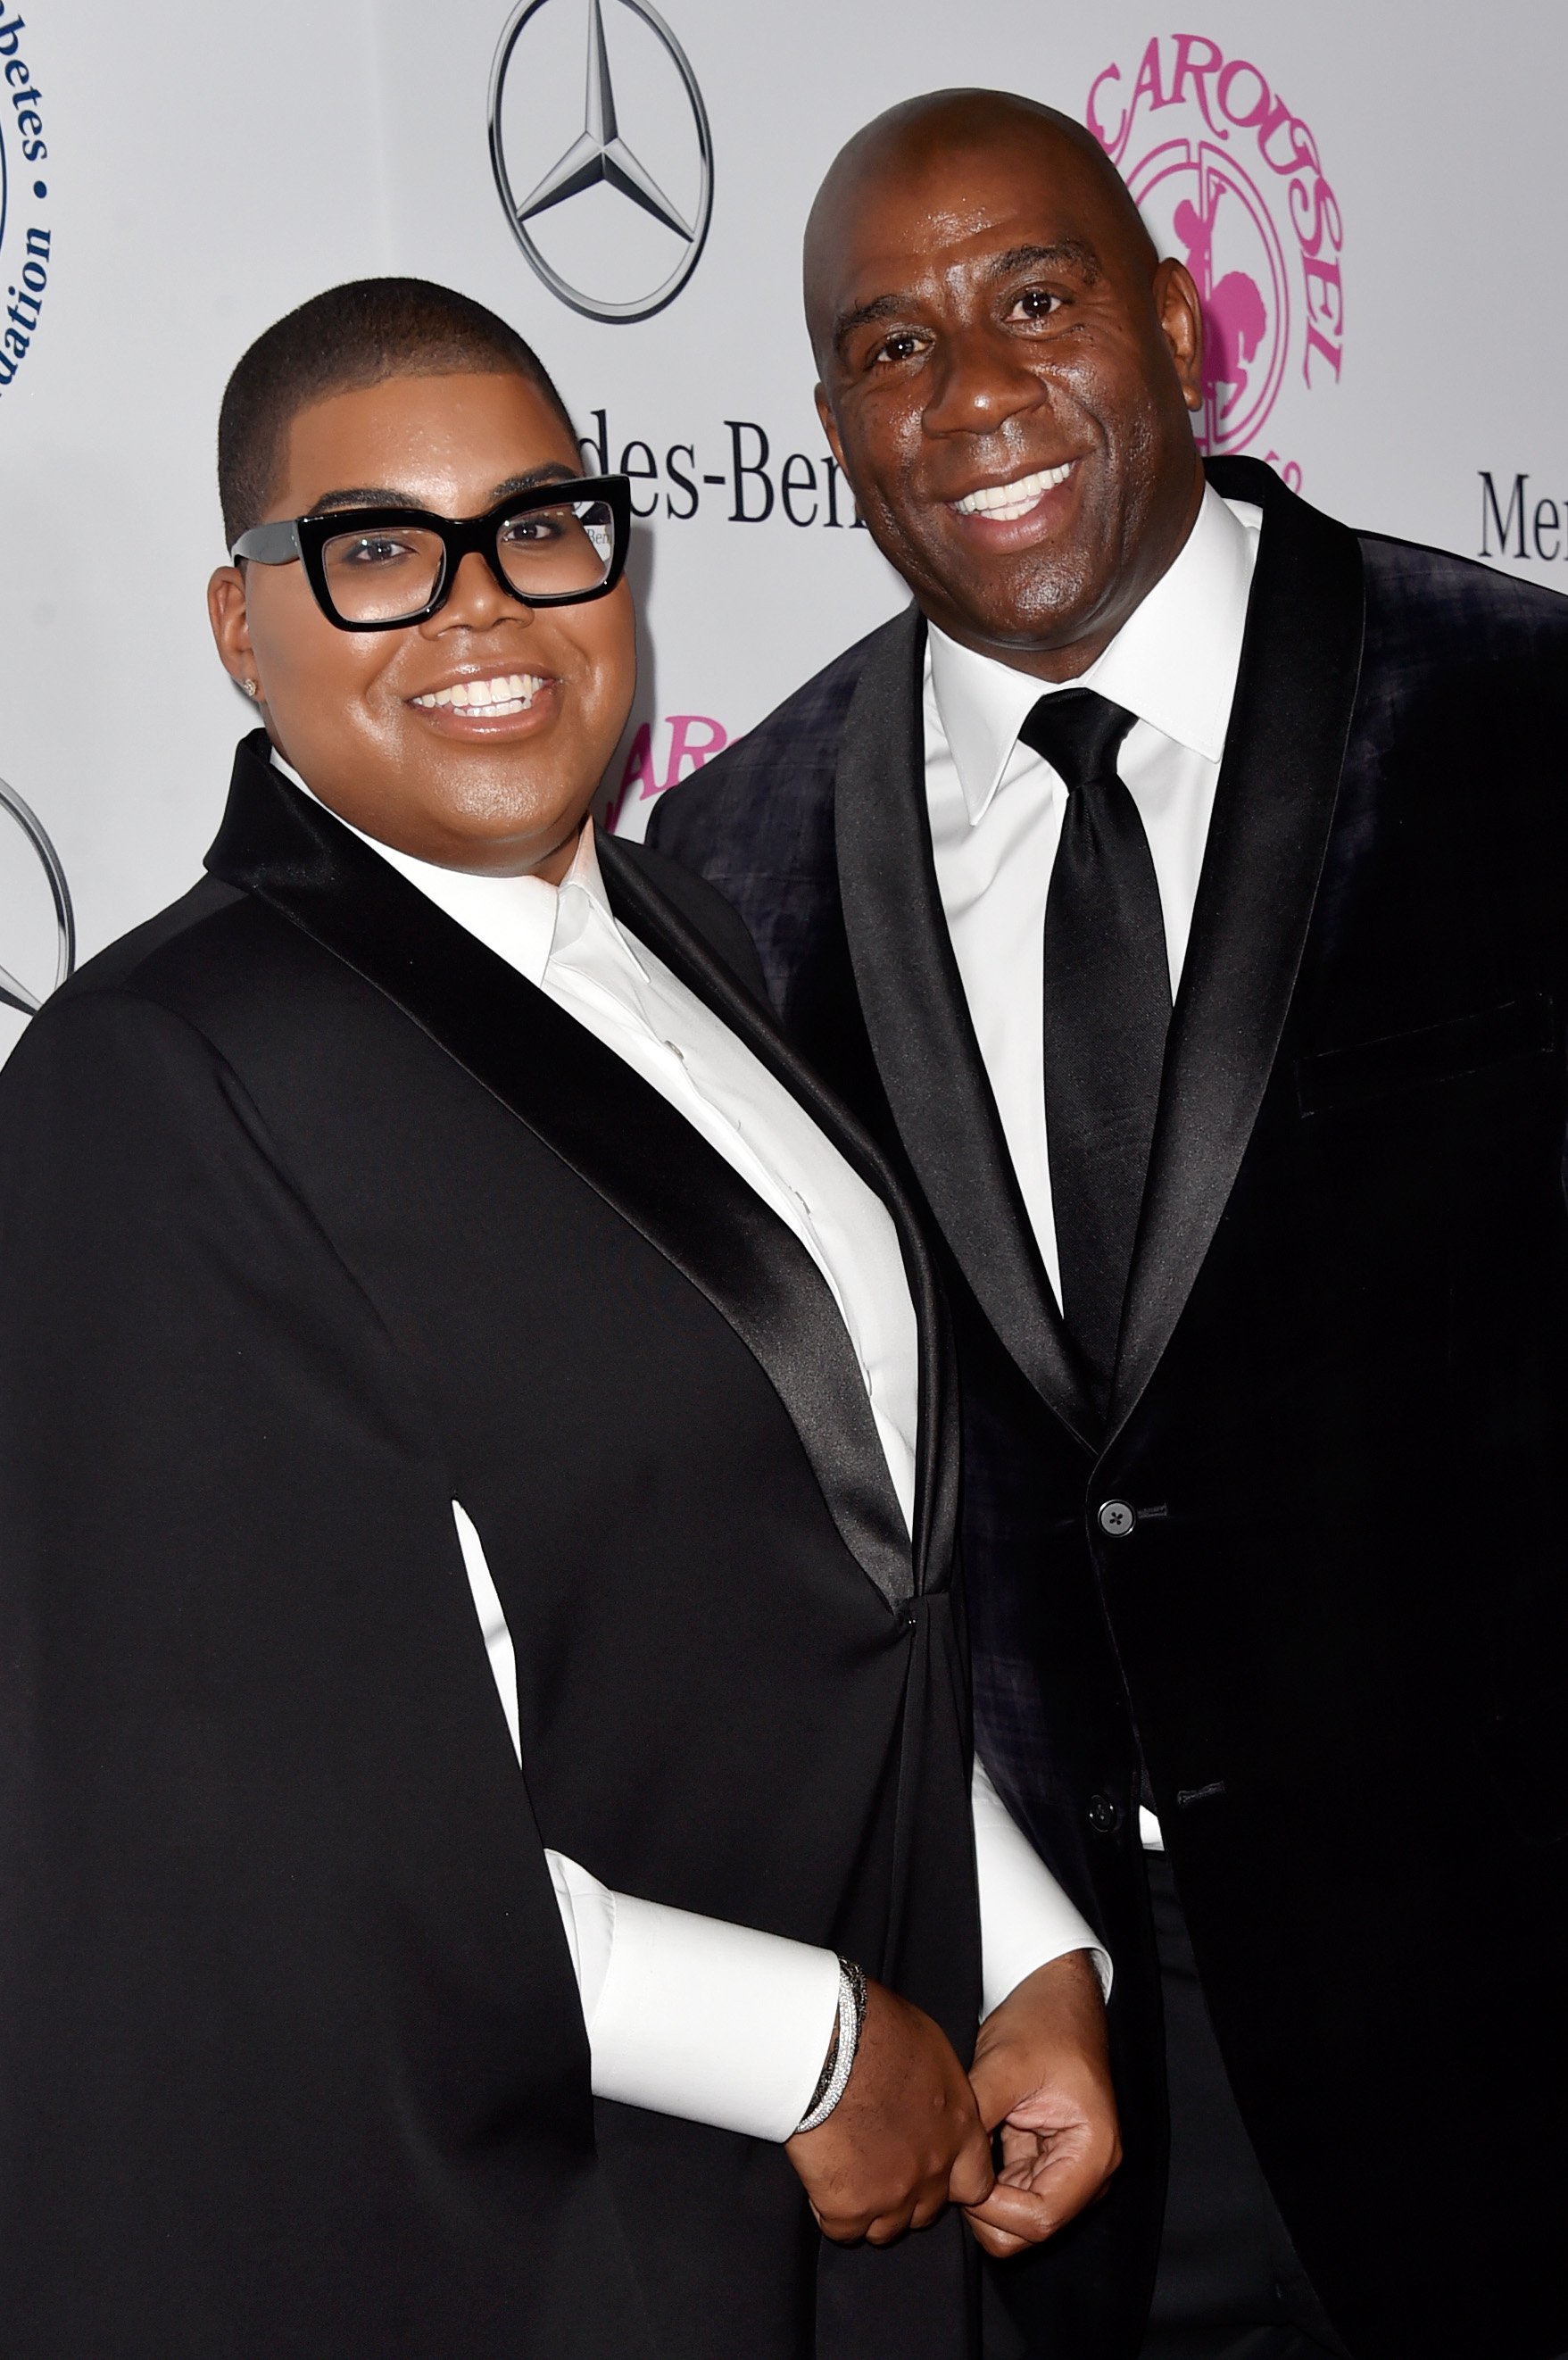 EJ Johnson and his father Magic Johnson at the 2014 Carousel of Hope Ball on October 11, 2014 in Beverly Hills, California | Source: Getty Images